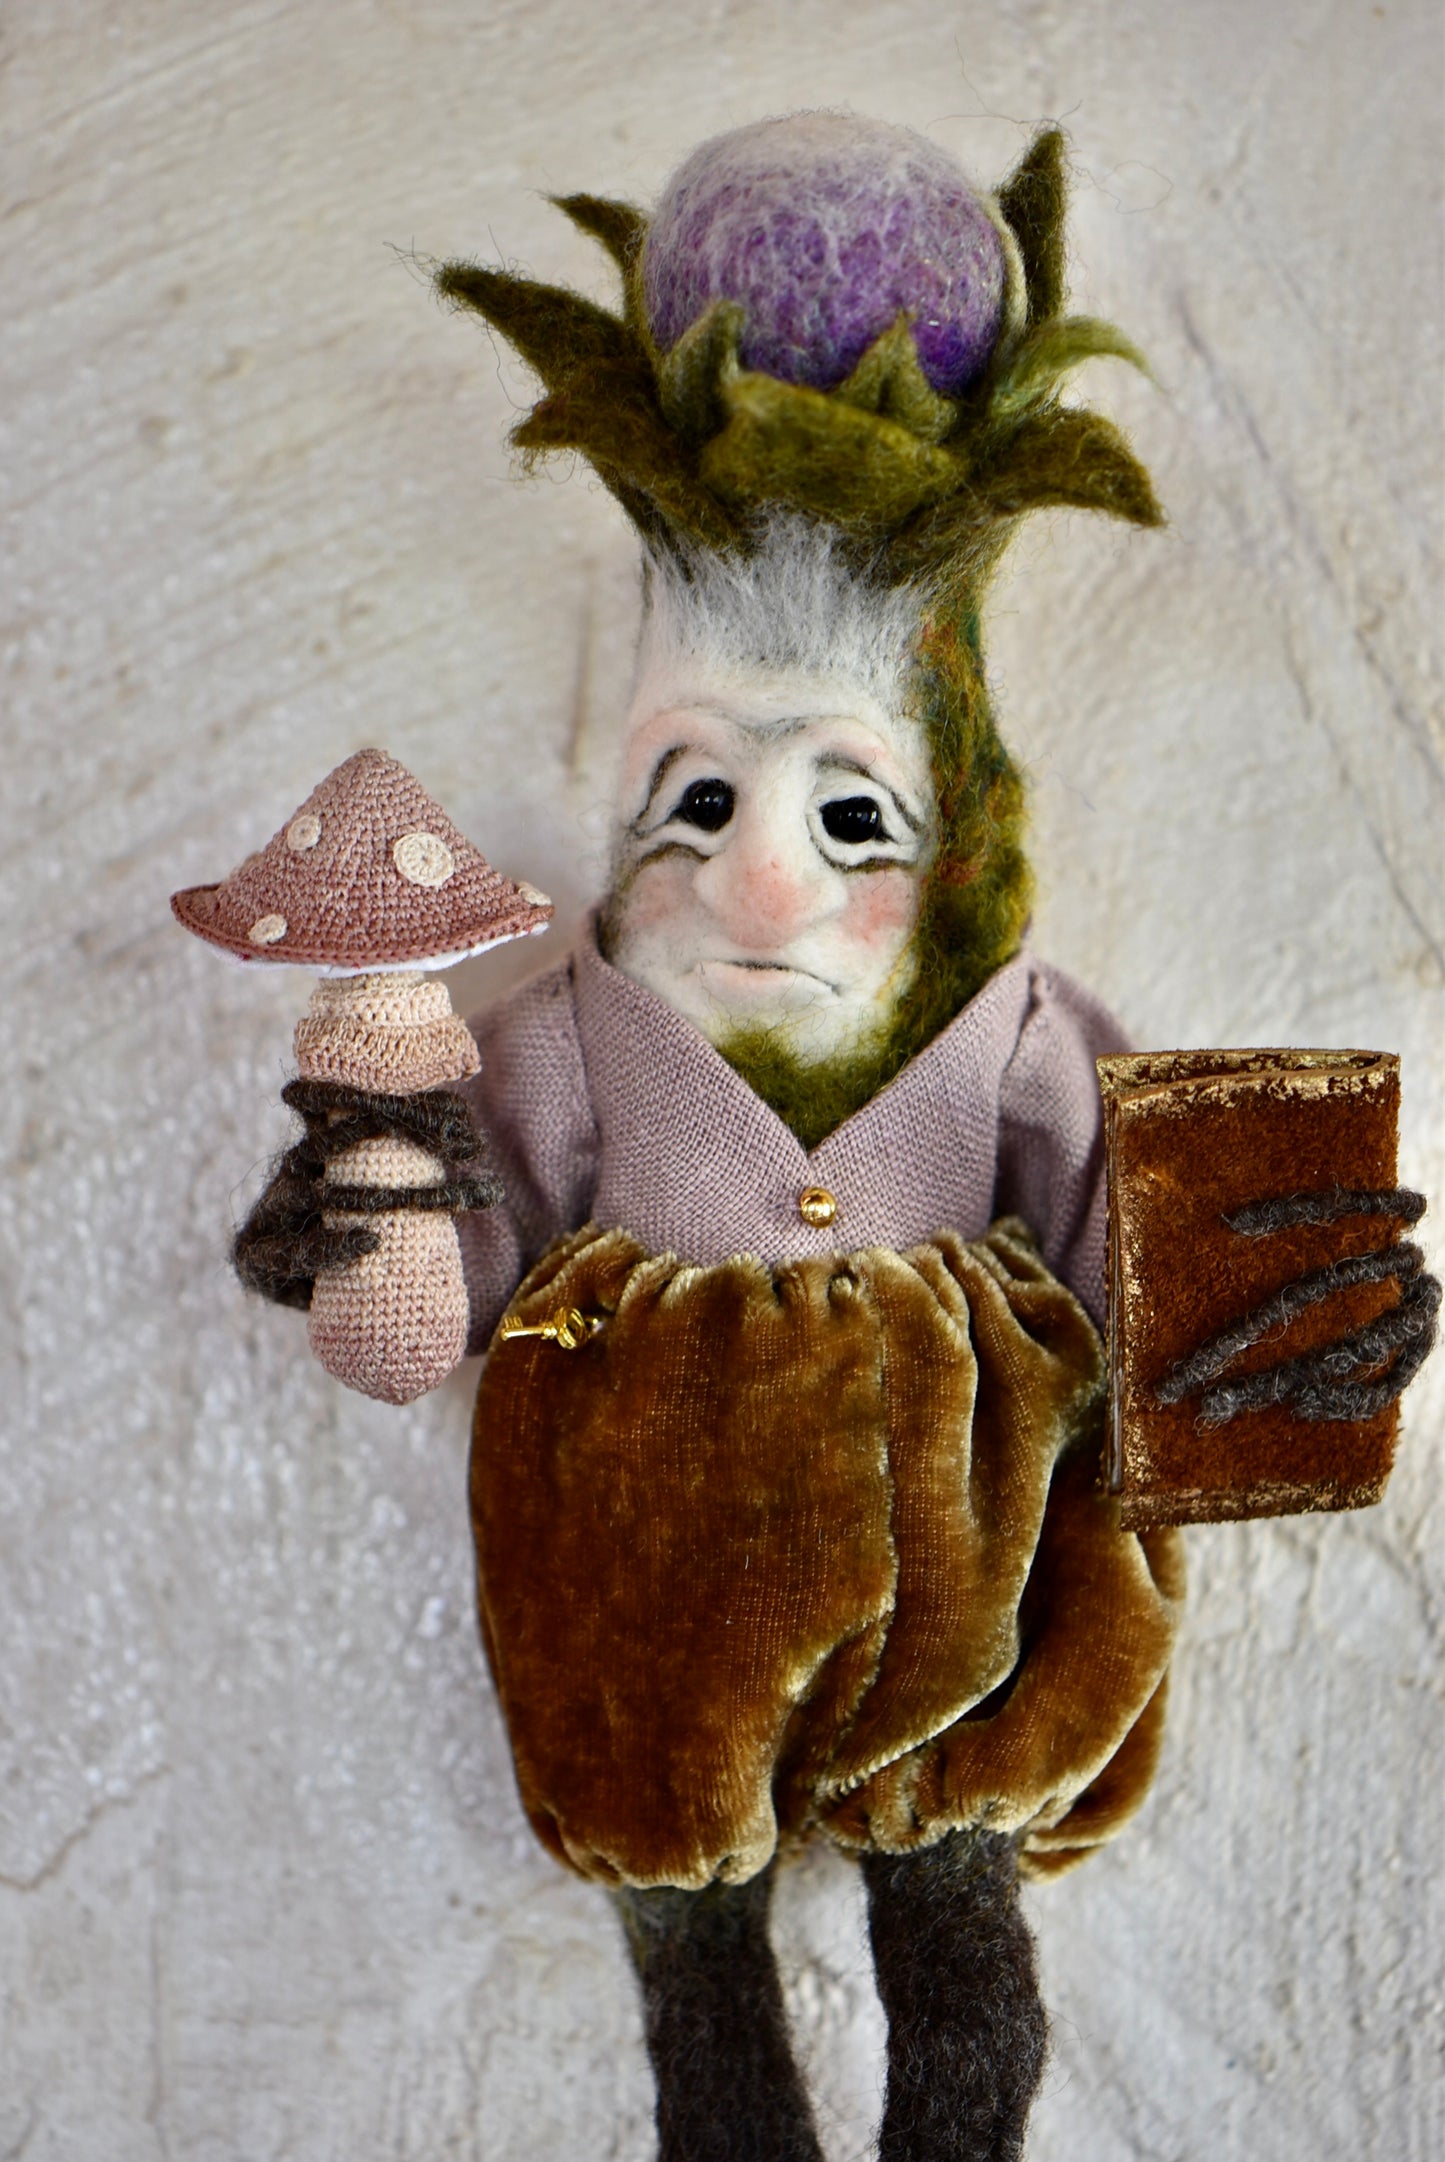 Magical Mandrake Creature - Collaboration with Tinybelloftheorairie and Harthicune